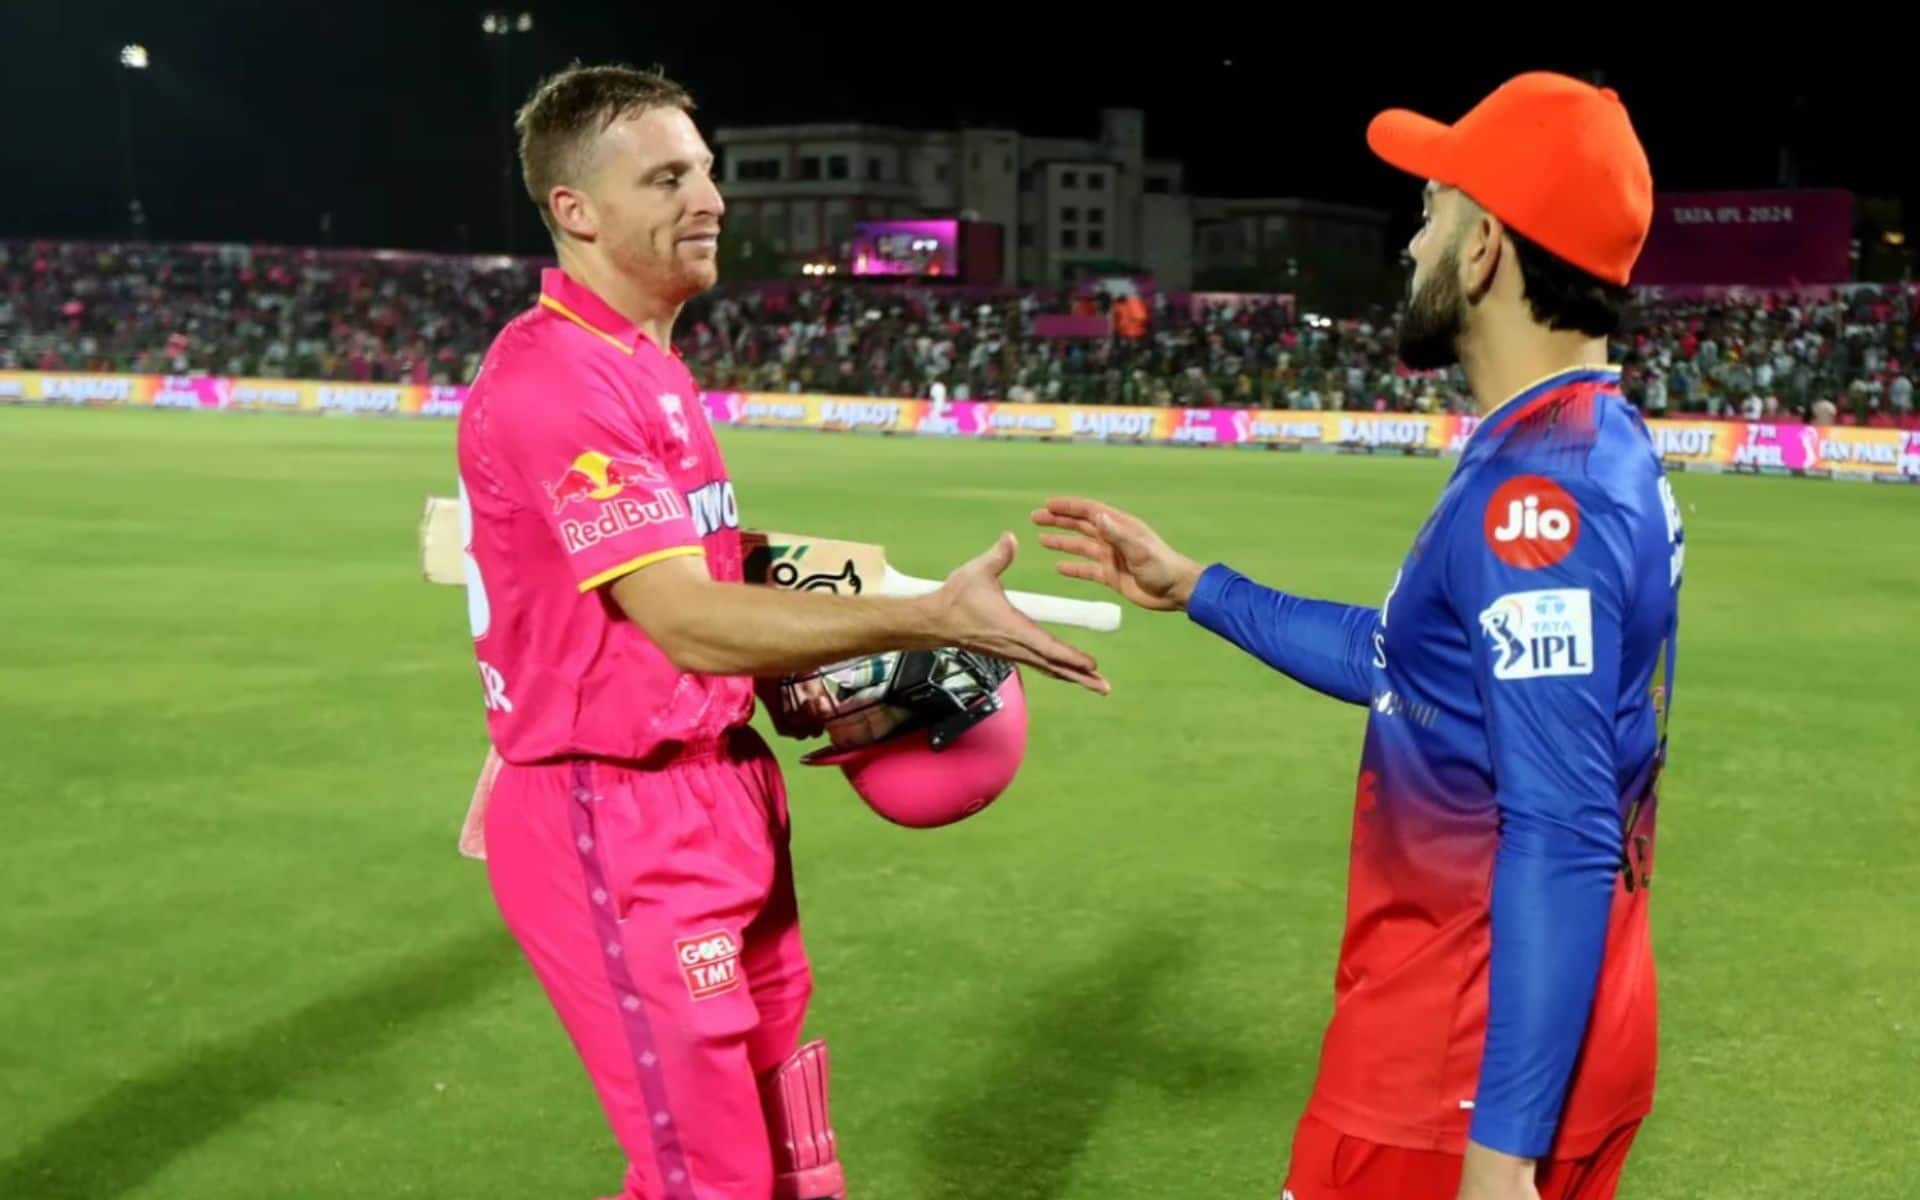 RR defeated RCB by 6 wickets on Saturday (IPLT20.com)